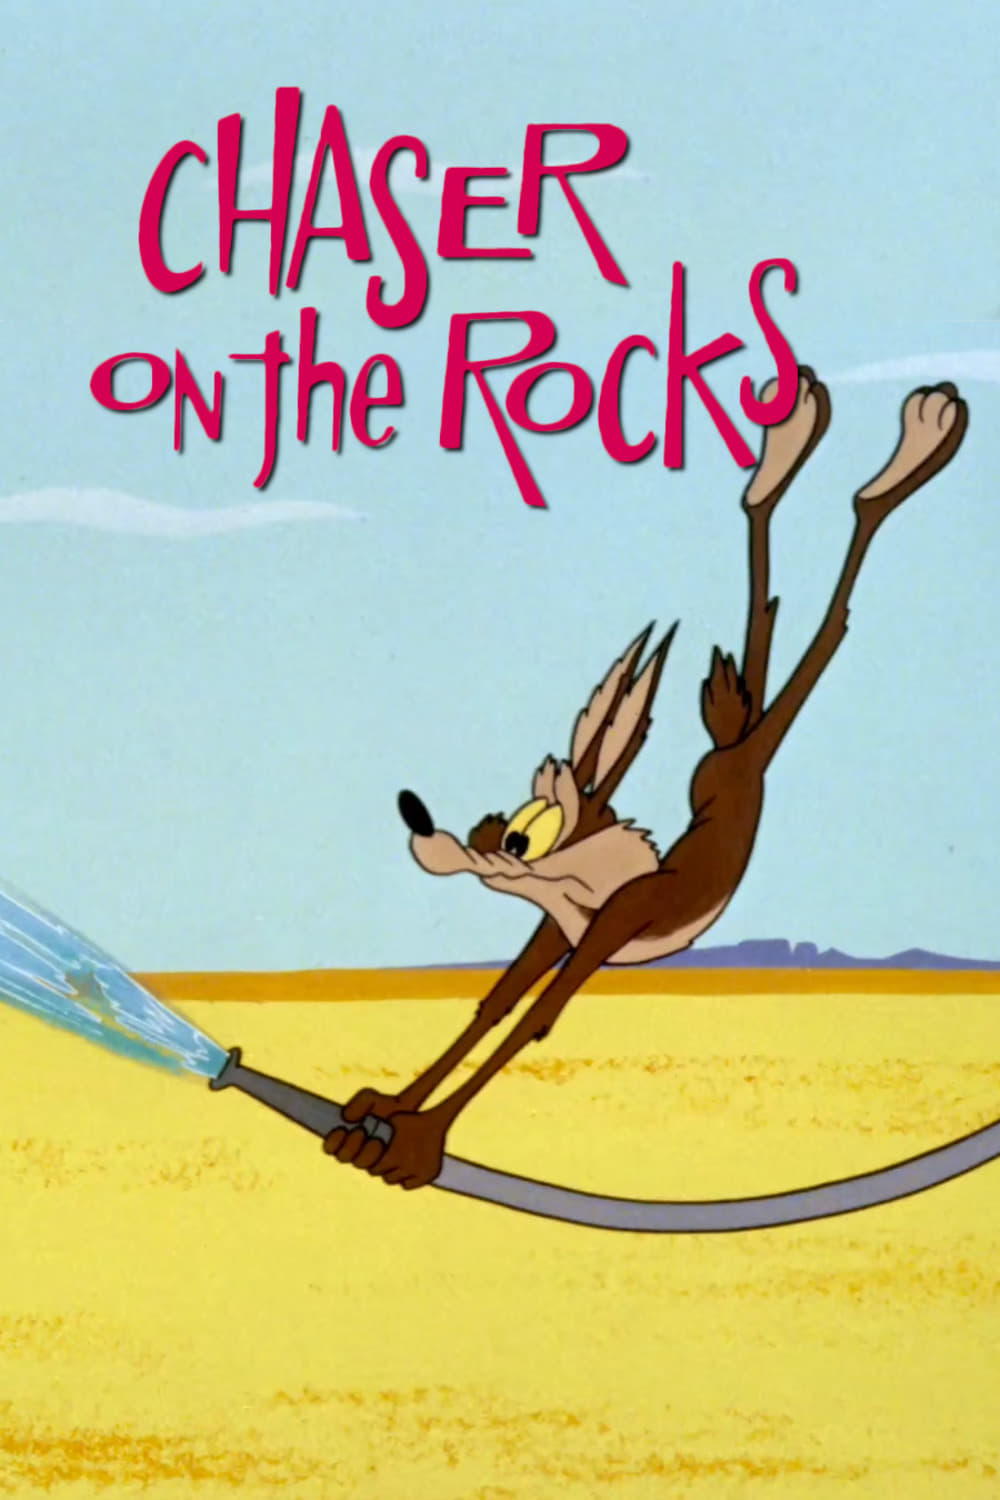 Chaser on the Rocks (1965)